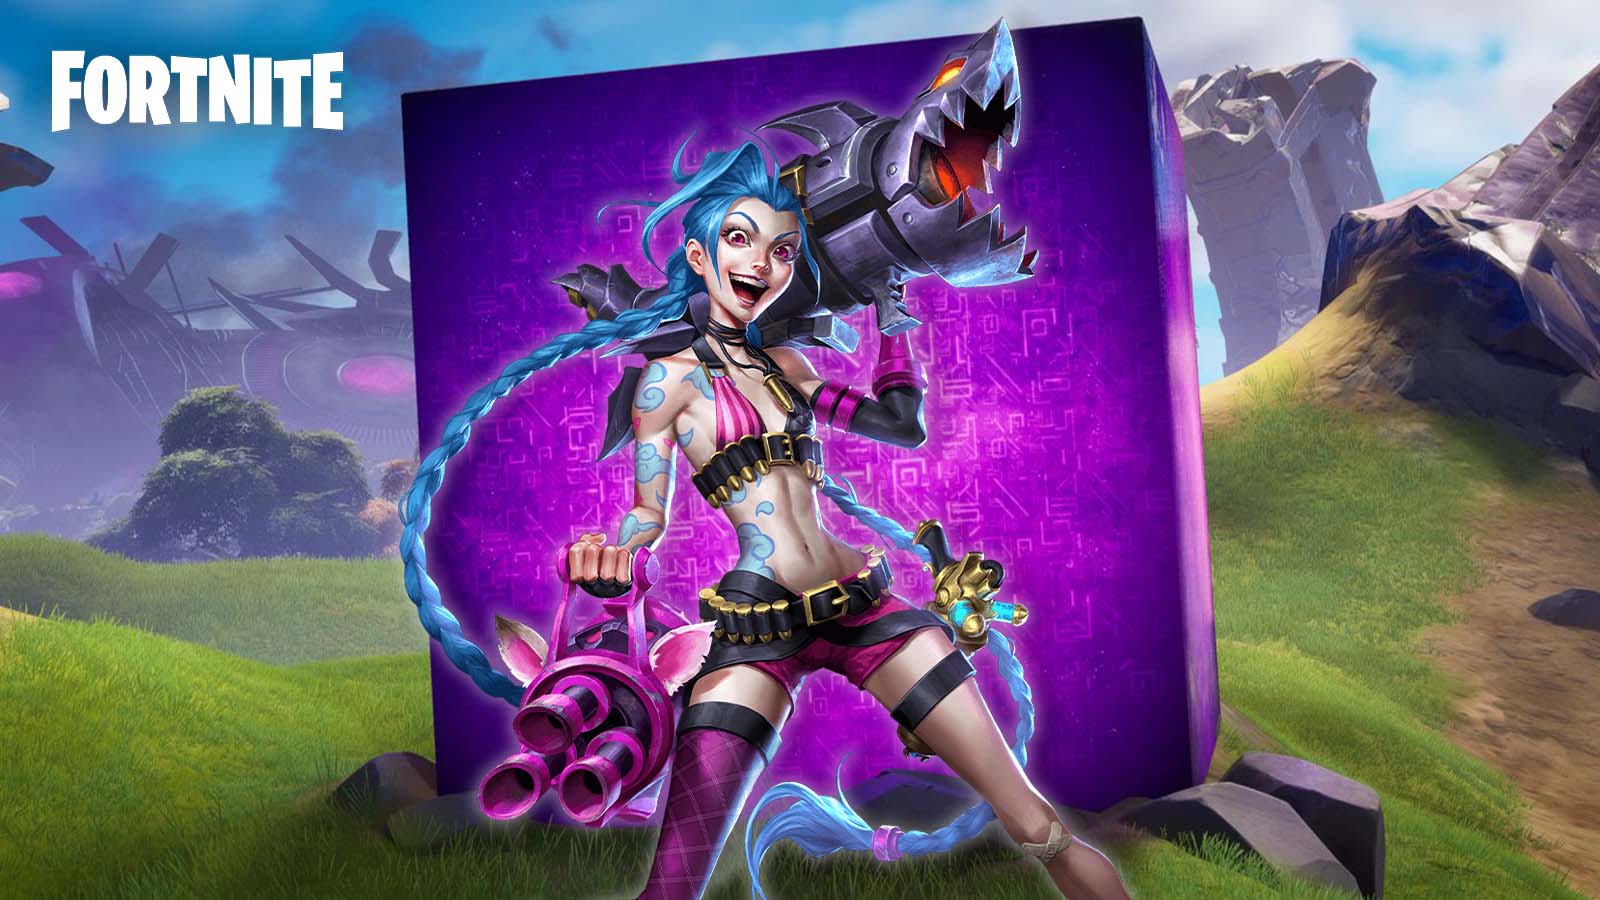 Jinx is coming to Fortnite in Epic / Riot colab